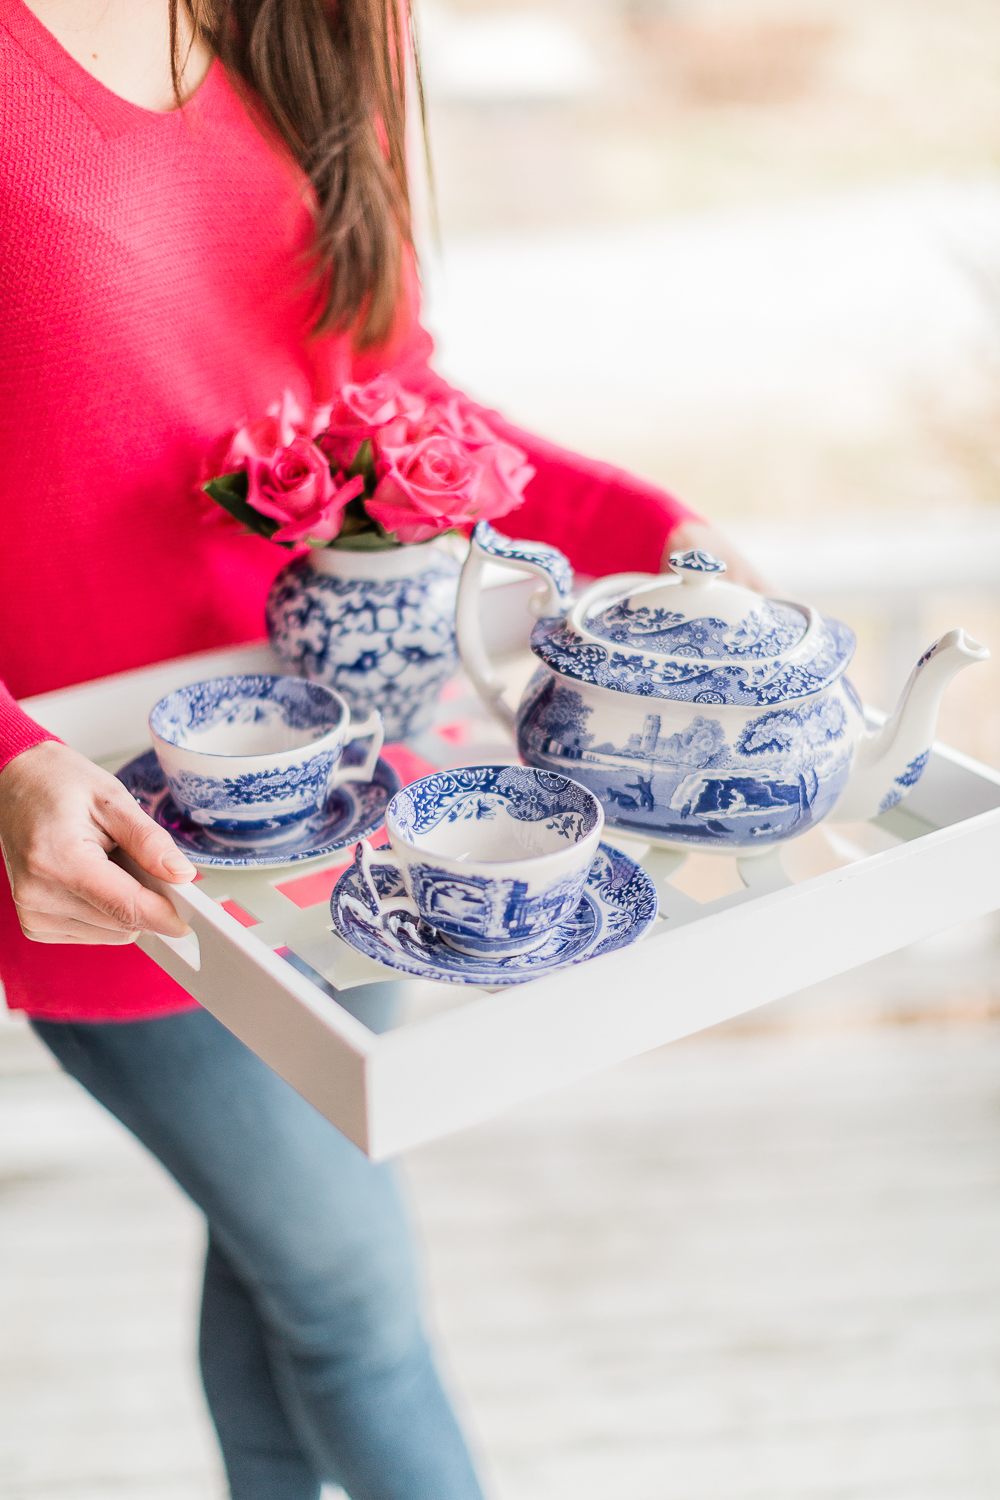 Best of January 2020: The Top 10 Things I Loved in January, spode blue italian teacups, spode blue italian teapot, blue italian china, popular lifestyle blogger Stephanie Ziajka, popular lifestyle blog Diary of a Debutante